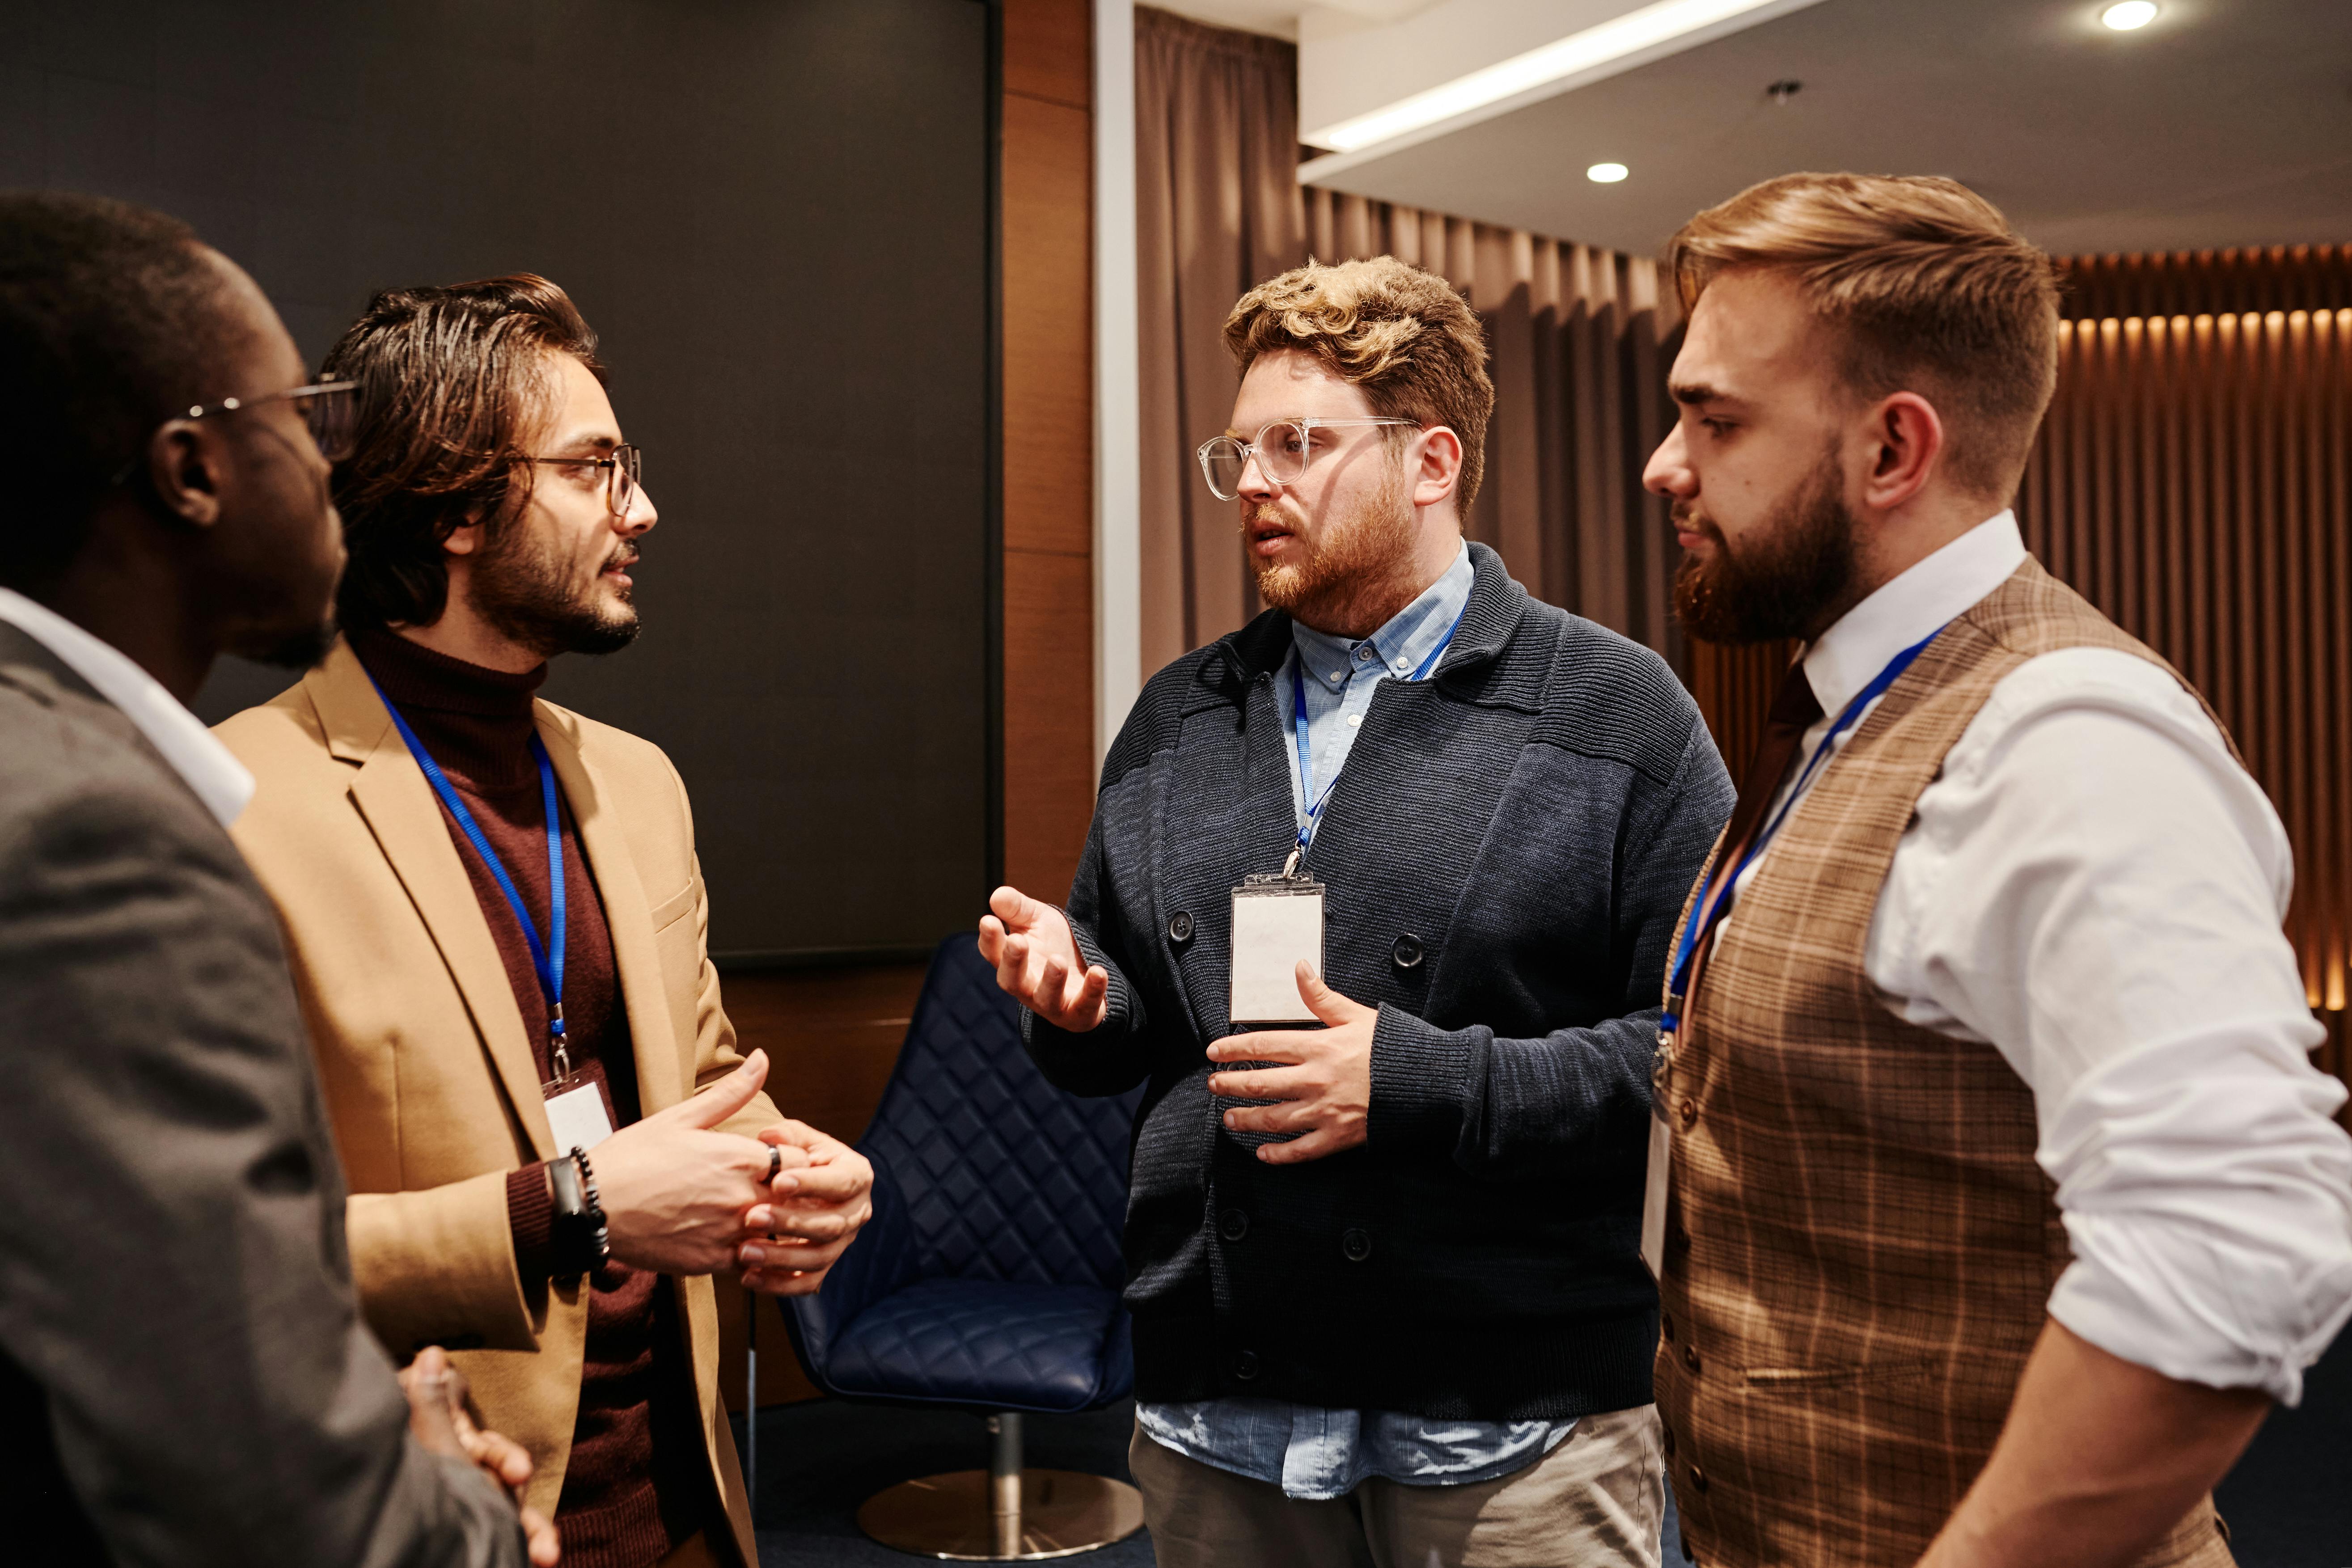 A group of guys having a conversation | Source: Pexels